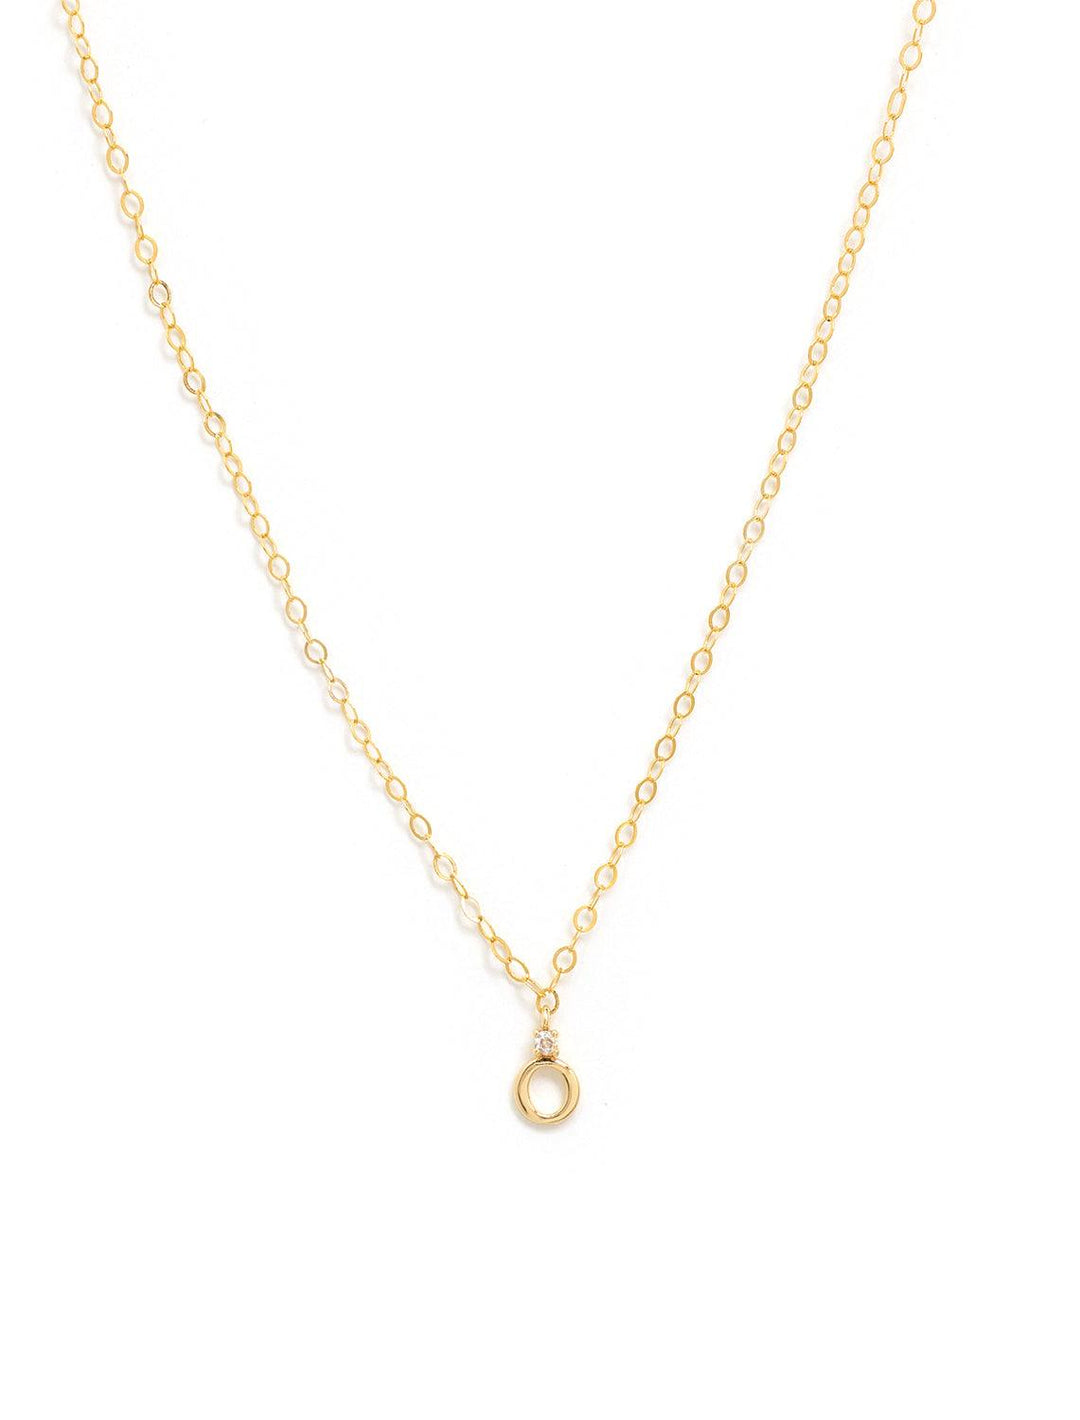 Marit Rae initial and cz necklace in gold | O - Twigs